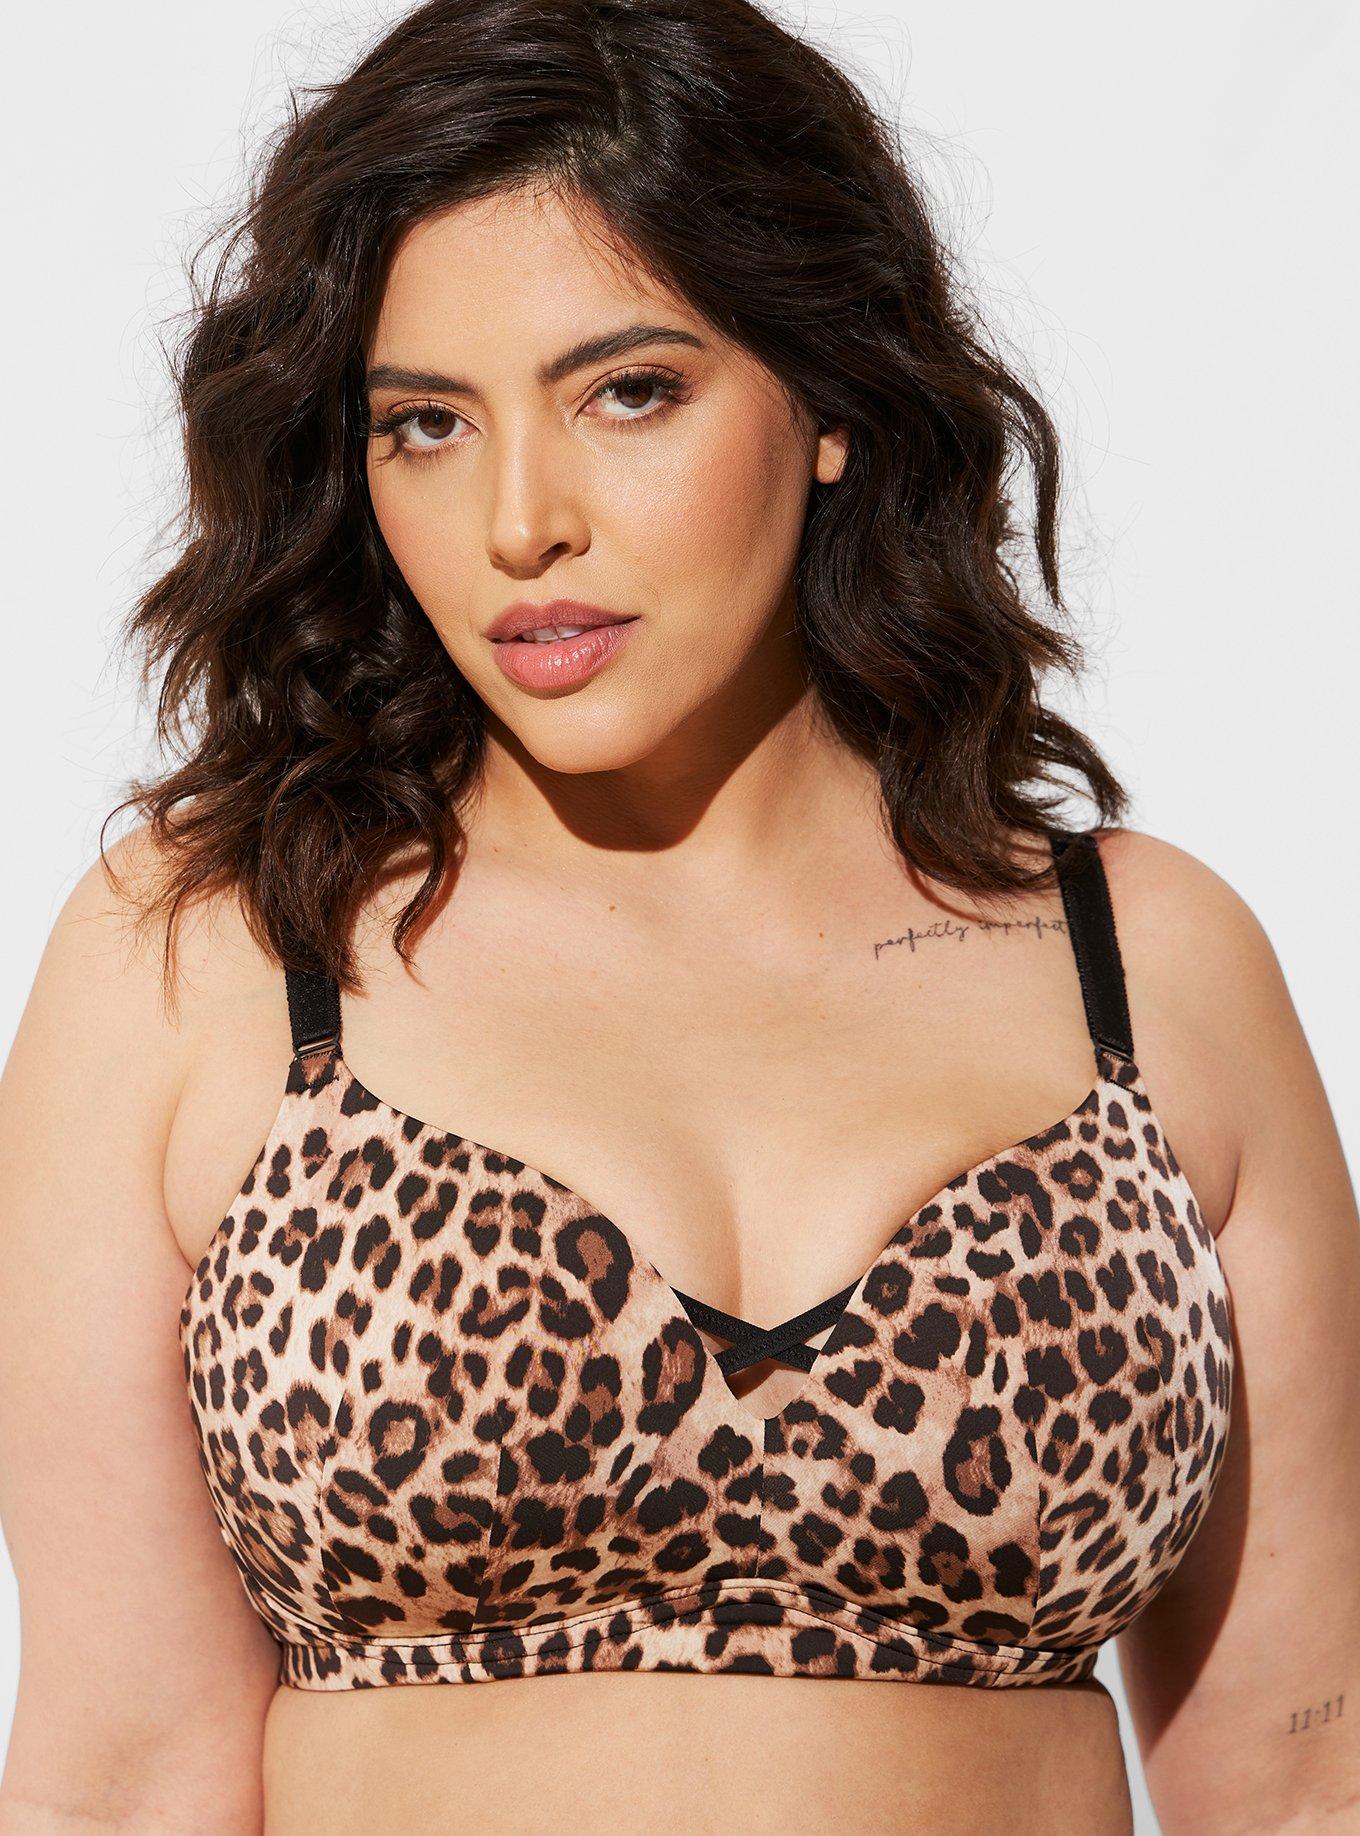 Torrid 46 DD PUSH-UP WIRE-FREE BRA - LACE LEOPARD WITH 360° BACK